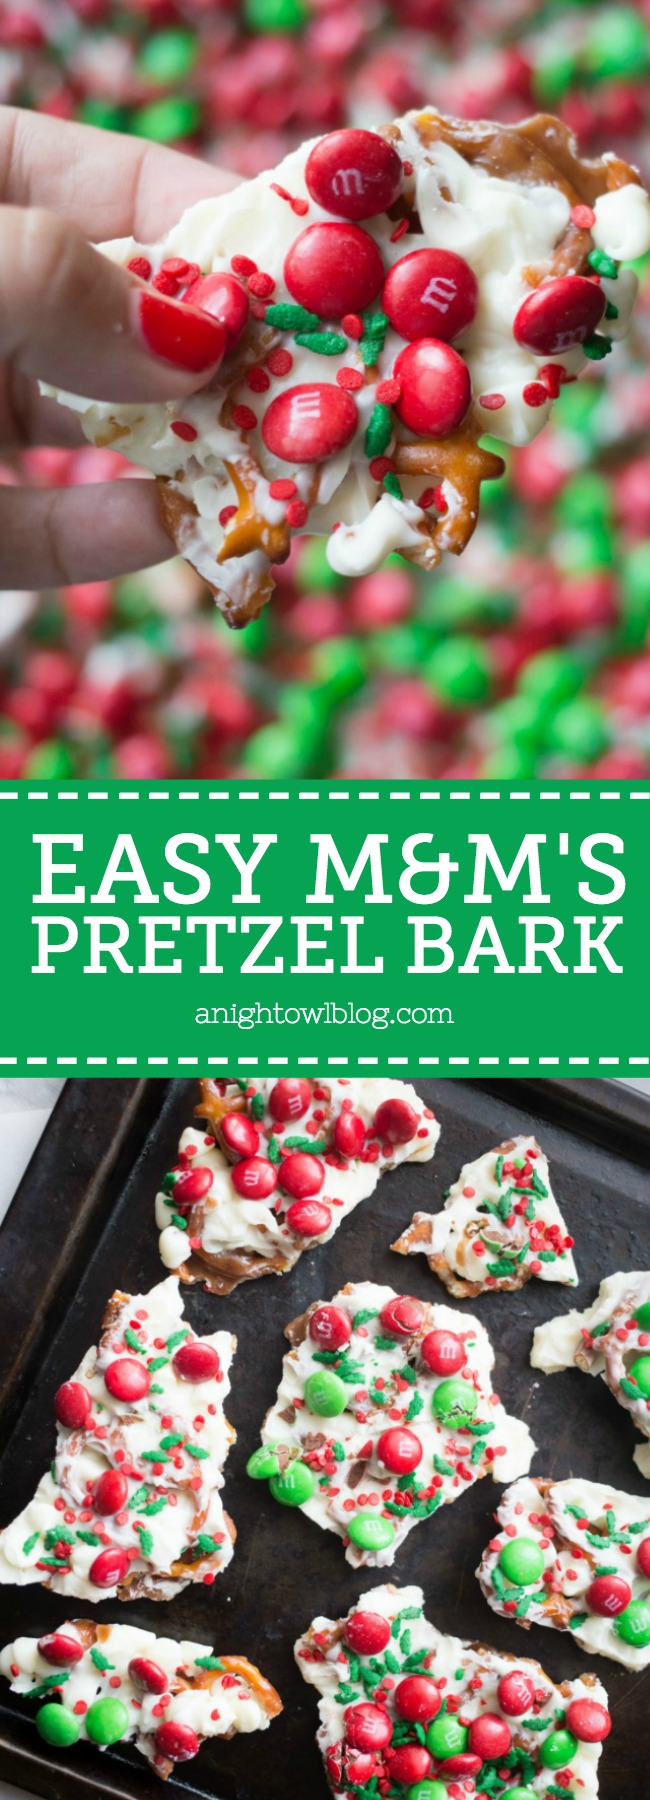 This M&M'S Pretzel Bark is the perfect combination of salty and sweet in one delicious holiday treat!